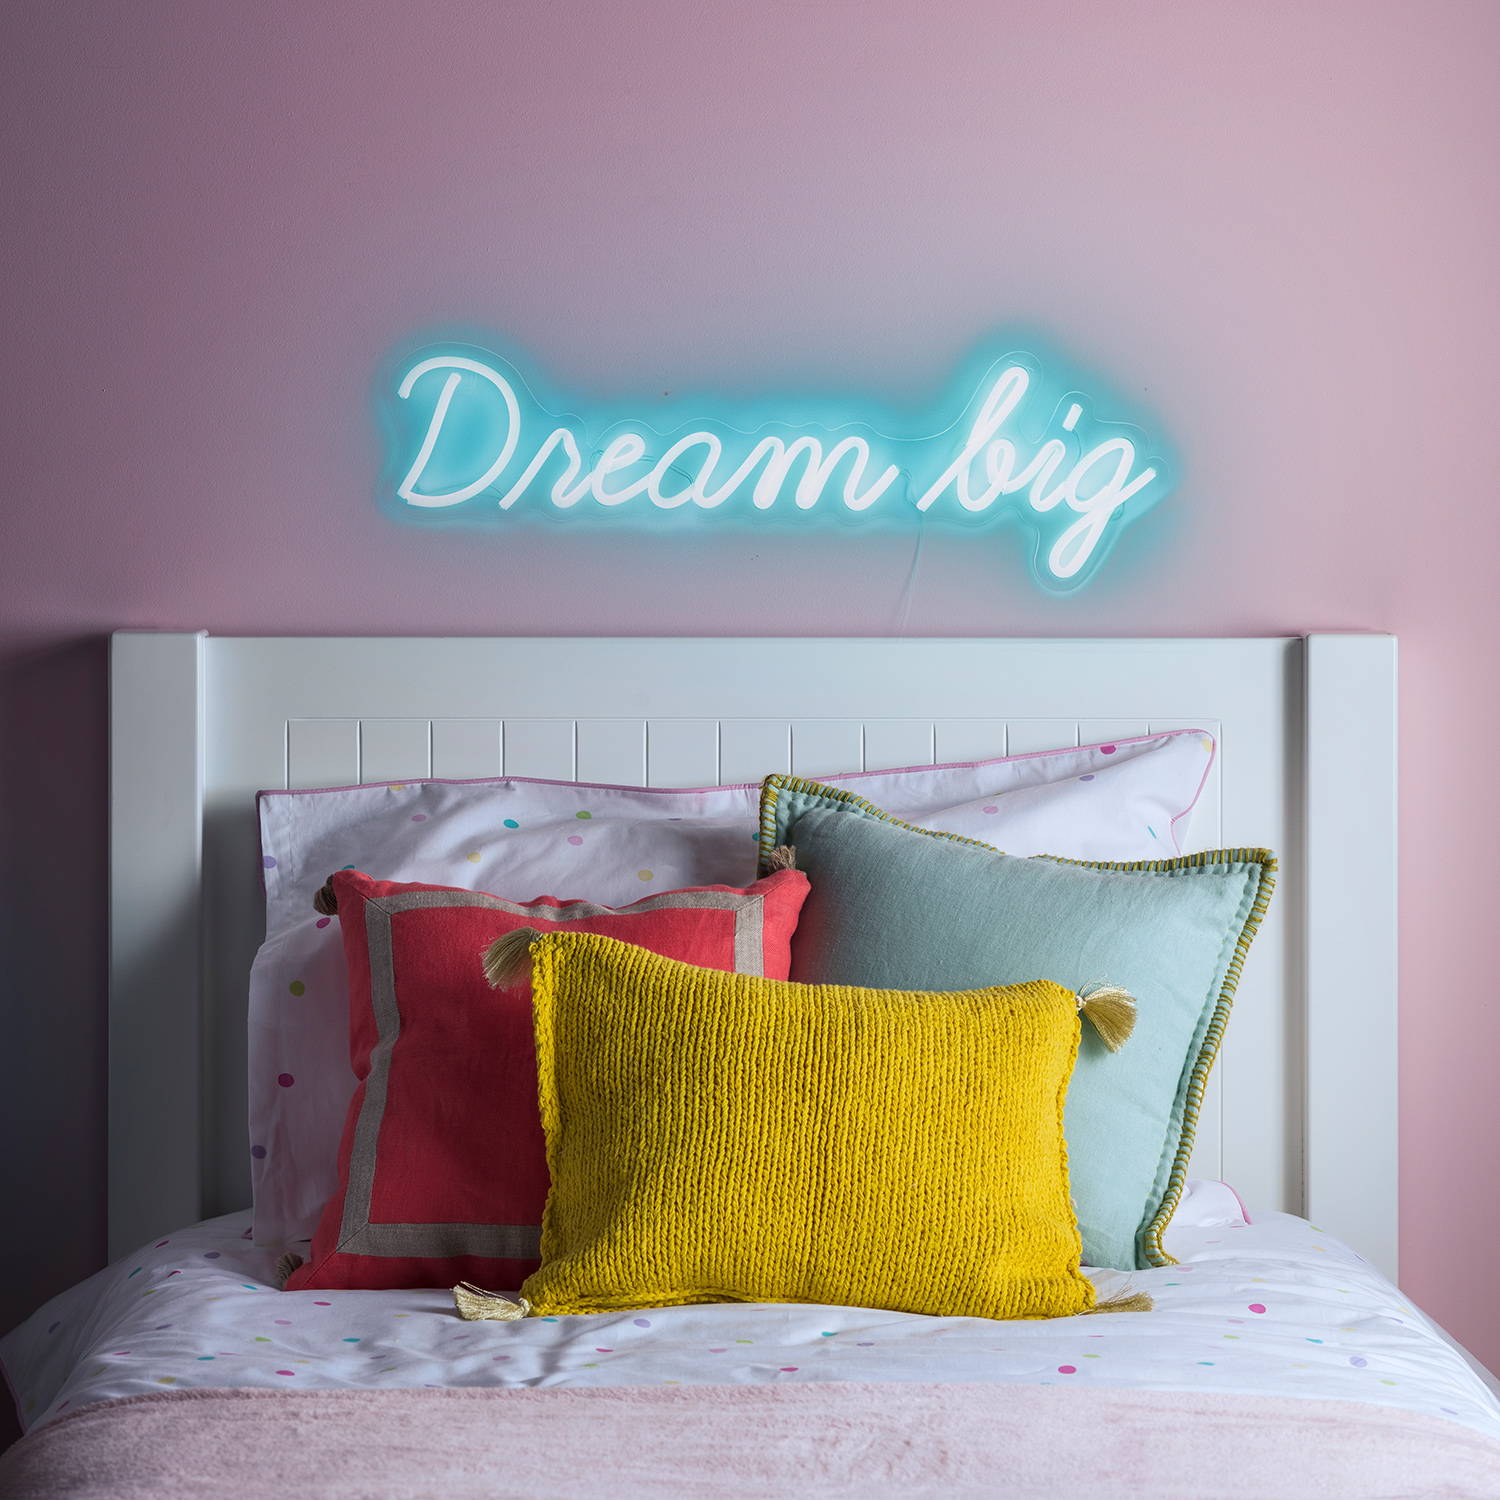 Dream big neon light illuminated and displayed on wall above bed